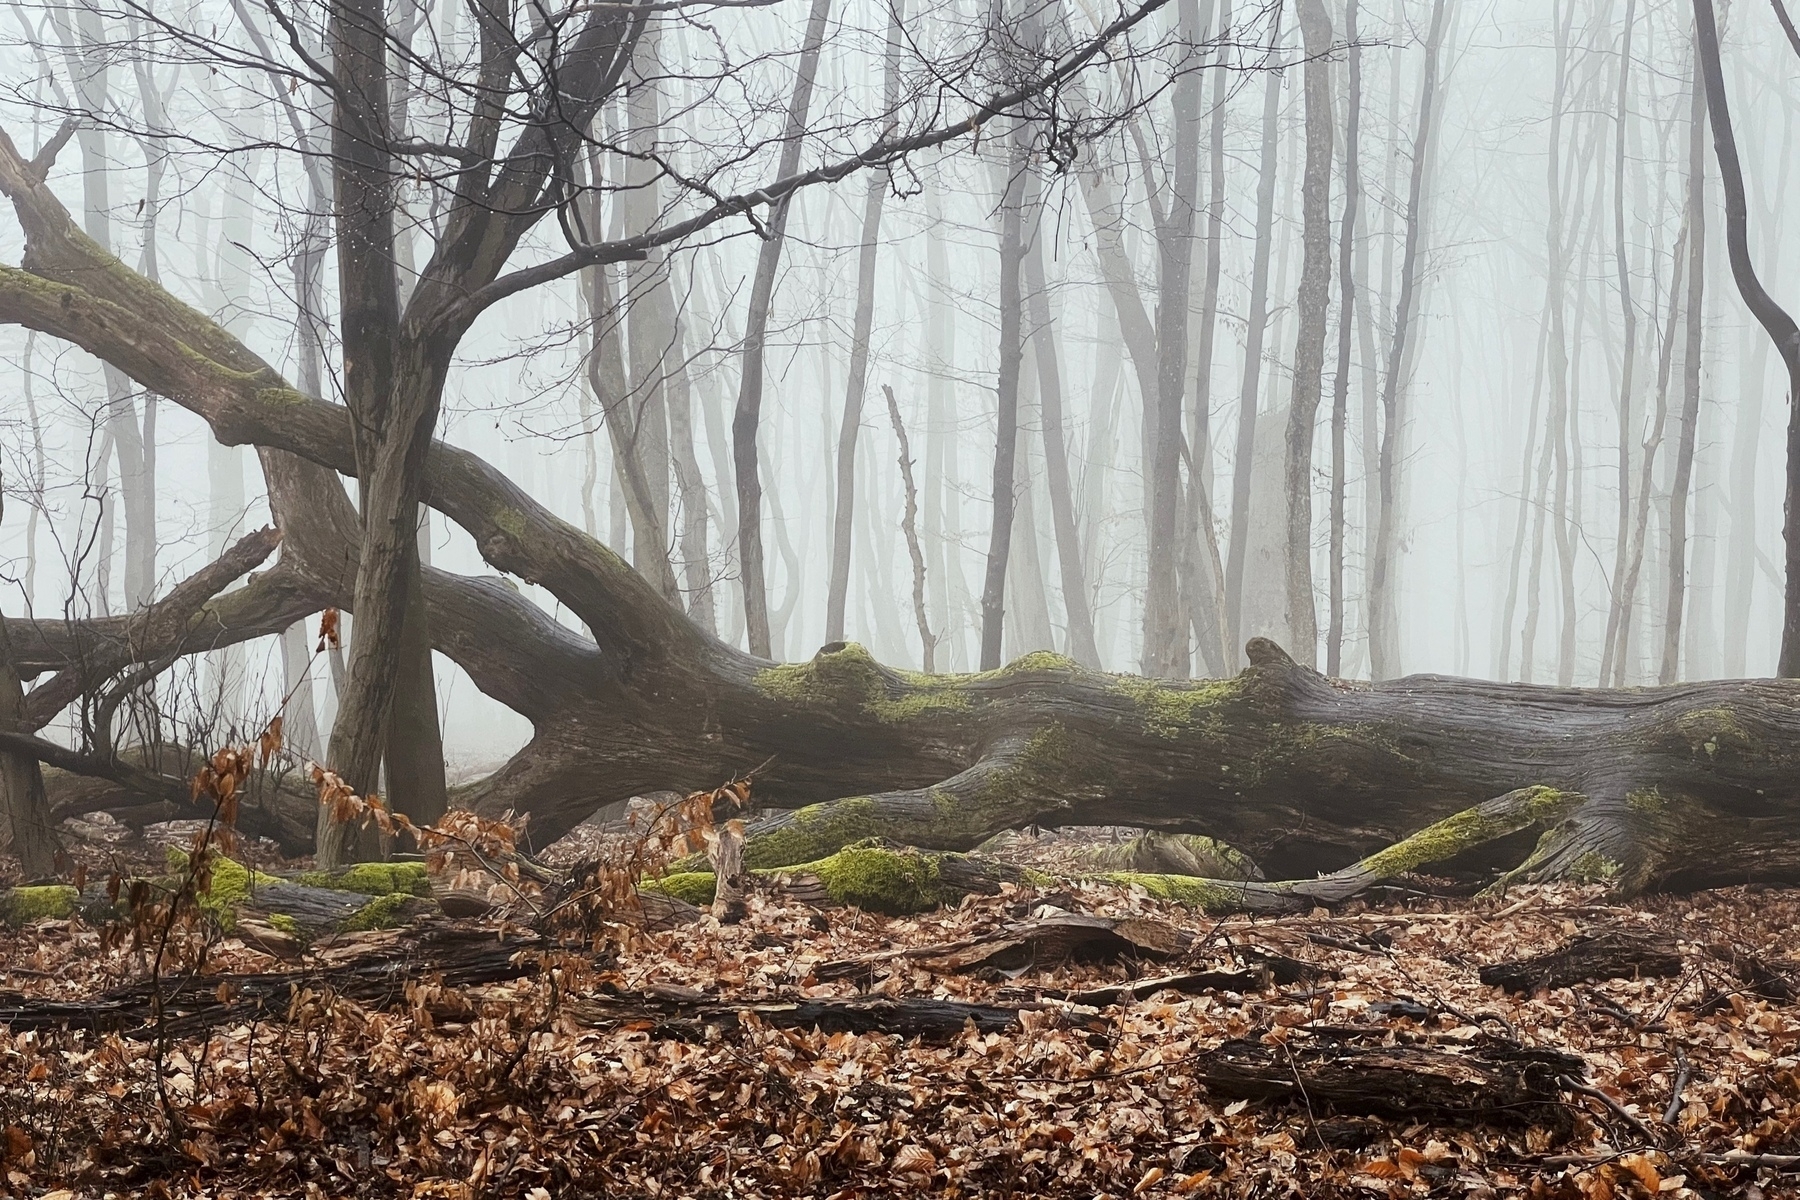 A fallen tree in the woods, covered by moss, brown leaves on the ground, very foggy and nearly no visibility 